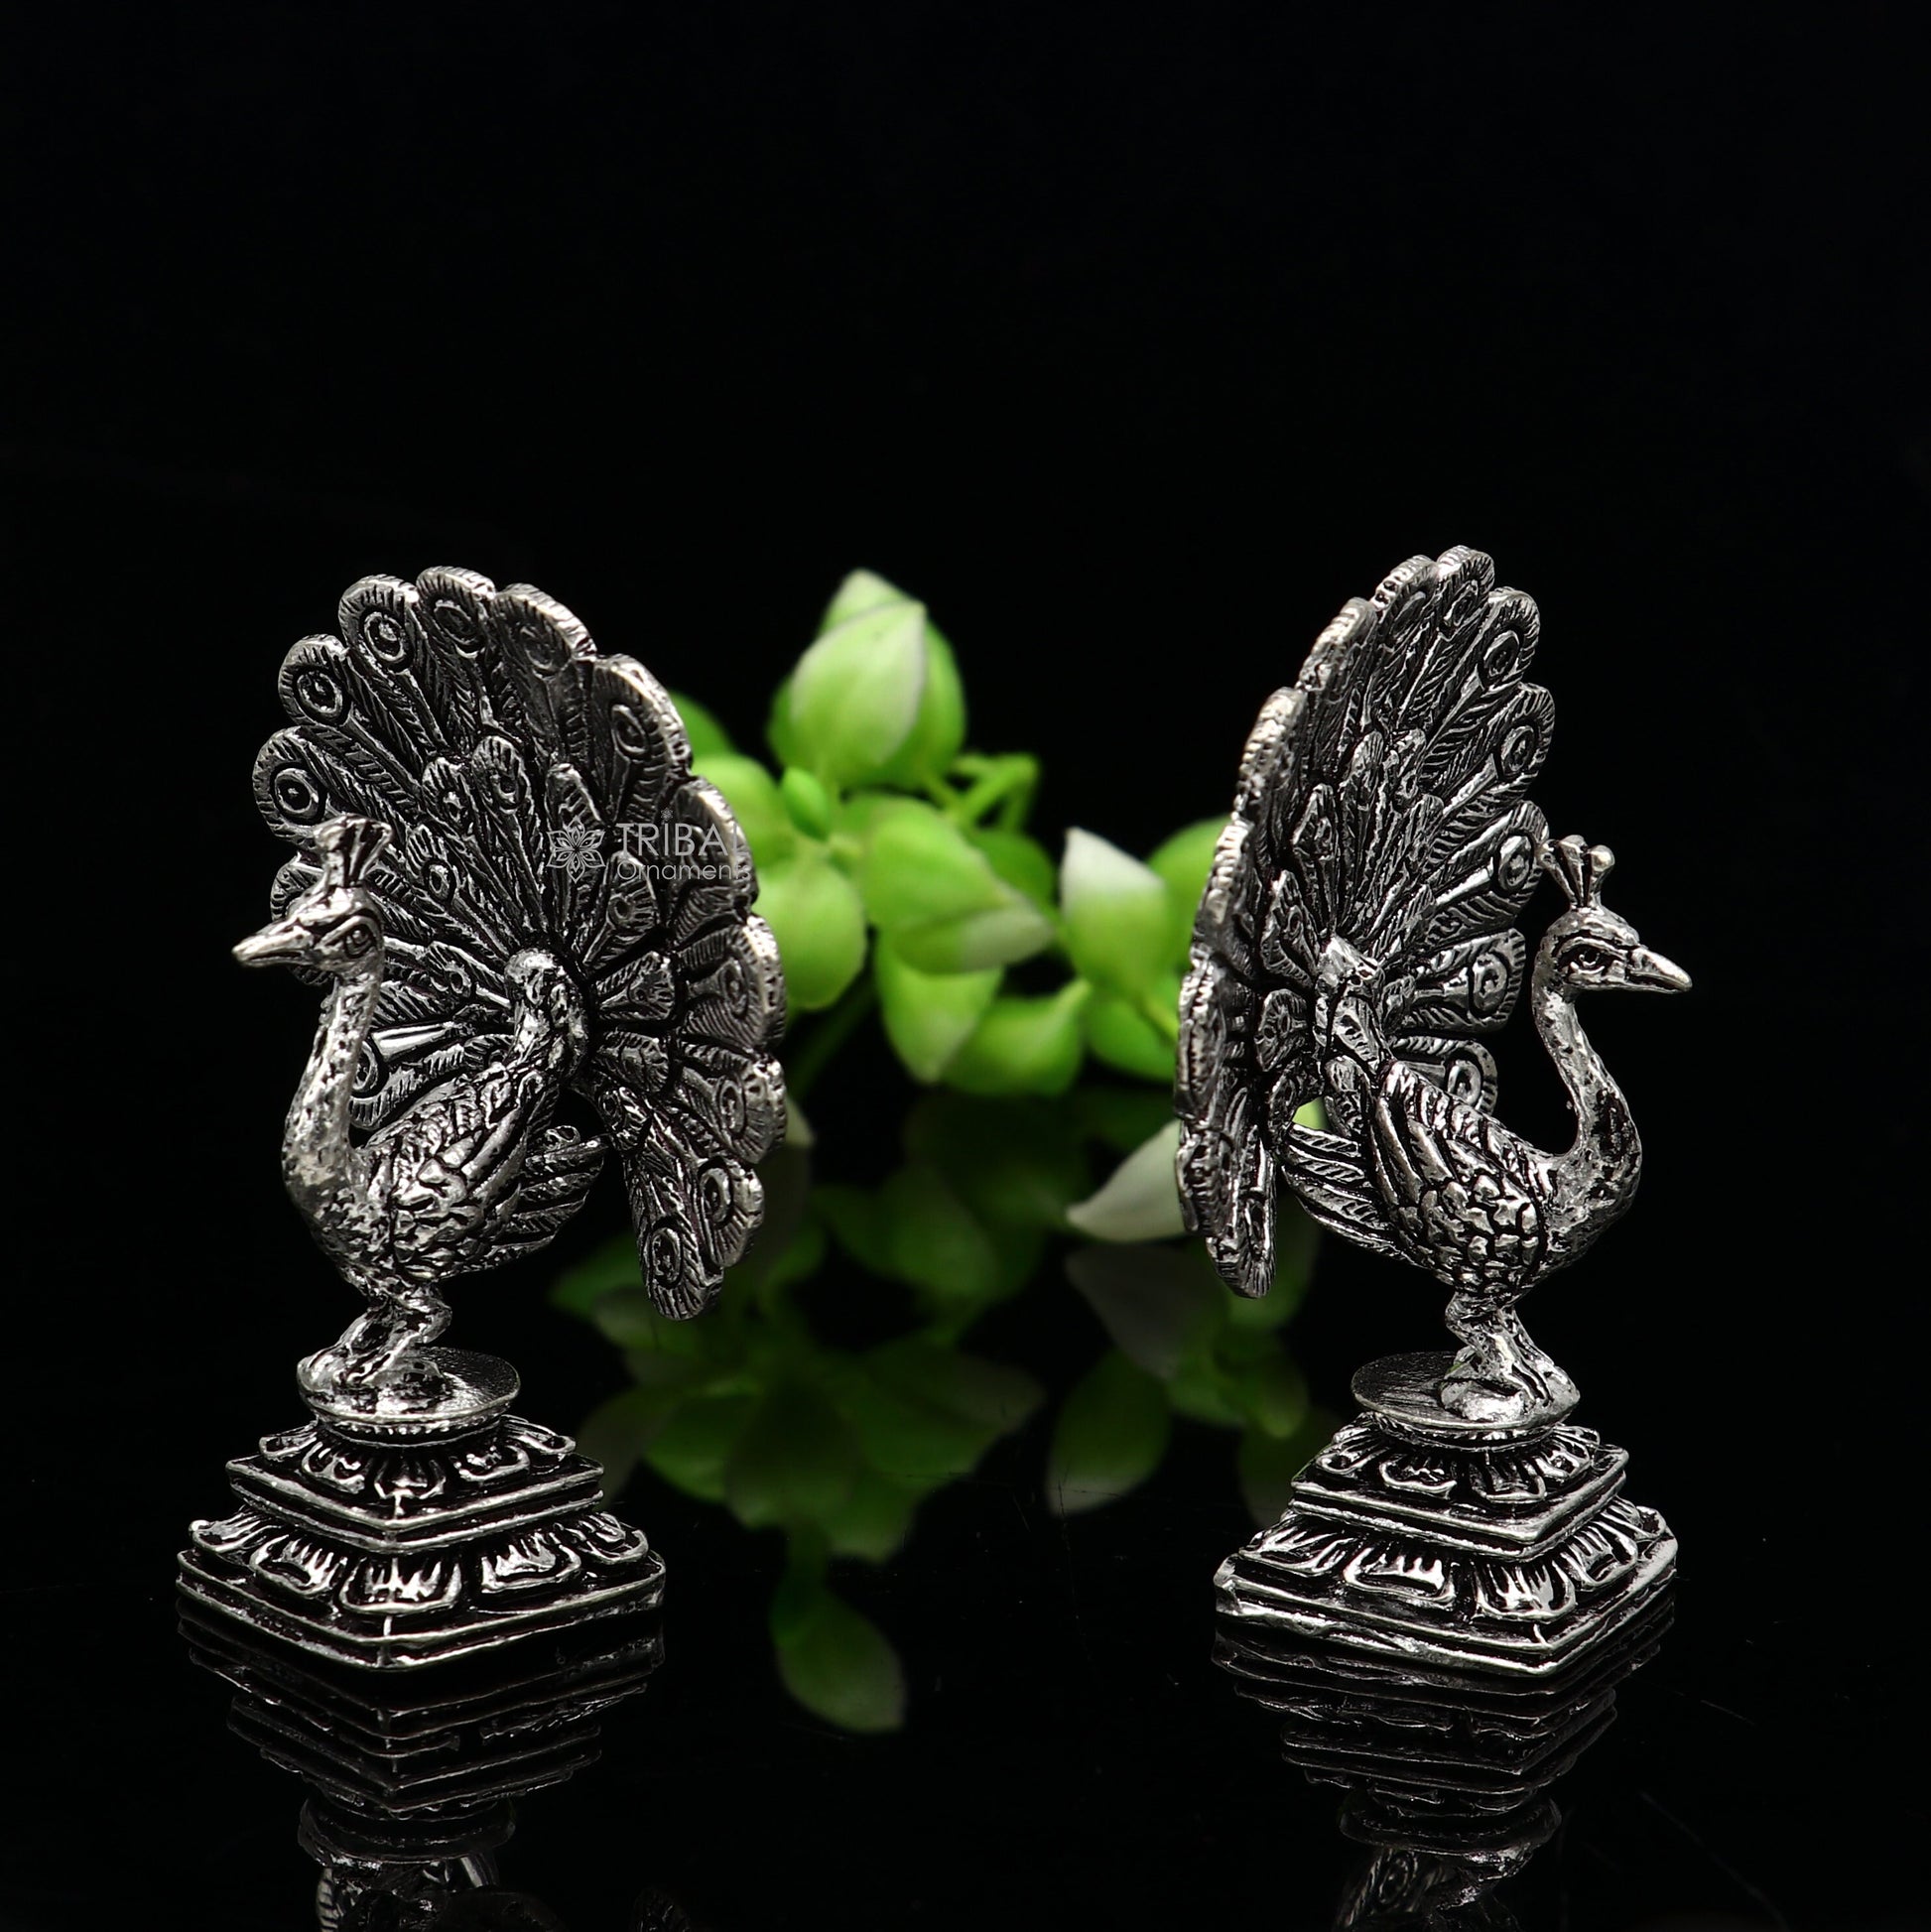 925 sterling silver handmade elegant amazing dancing peacock statue, silver article, silver figurine, silver puja article art753 - TRIBAL ORNAMENTS